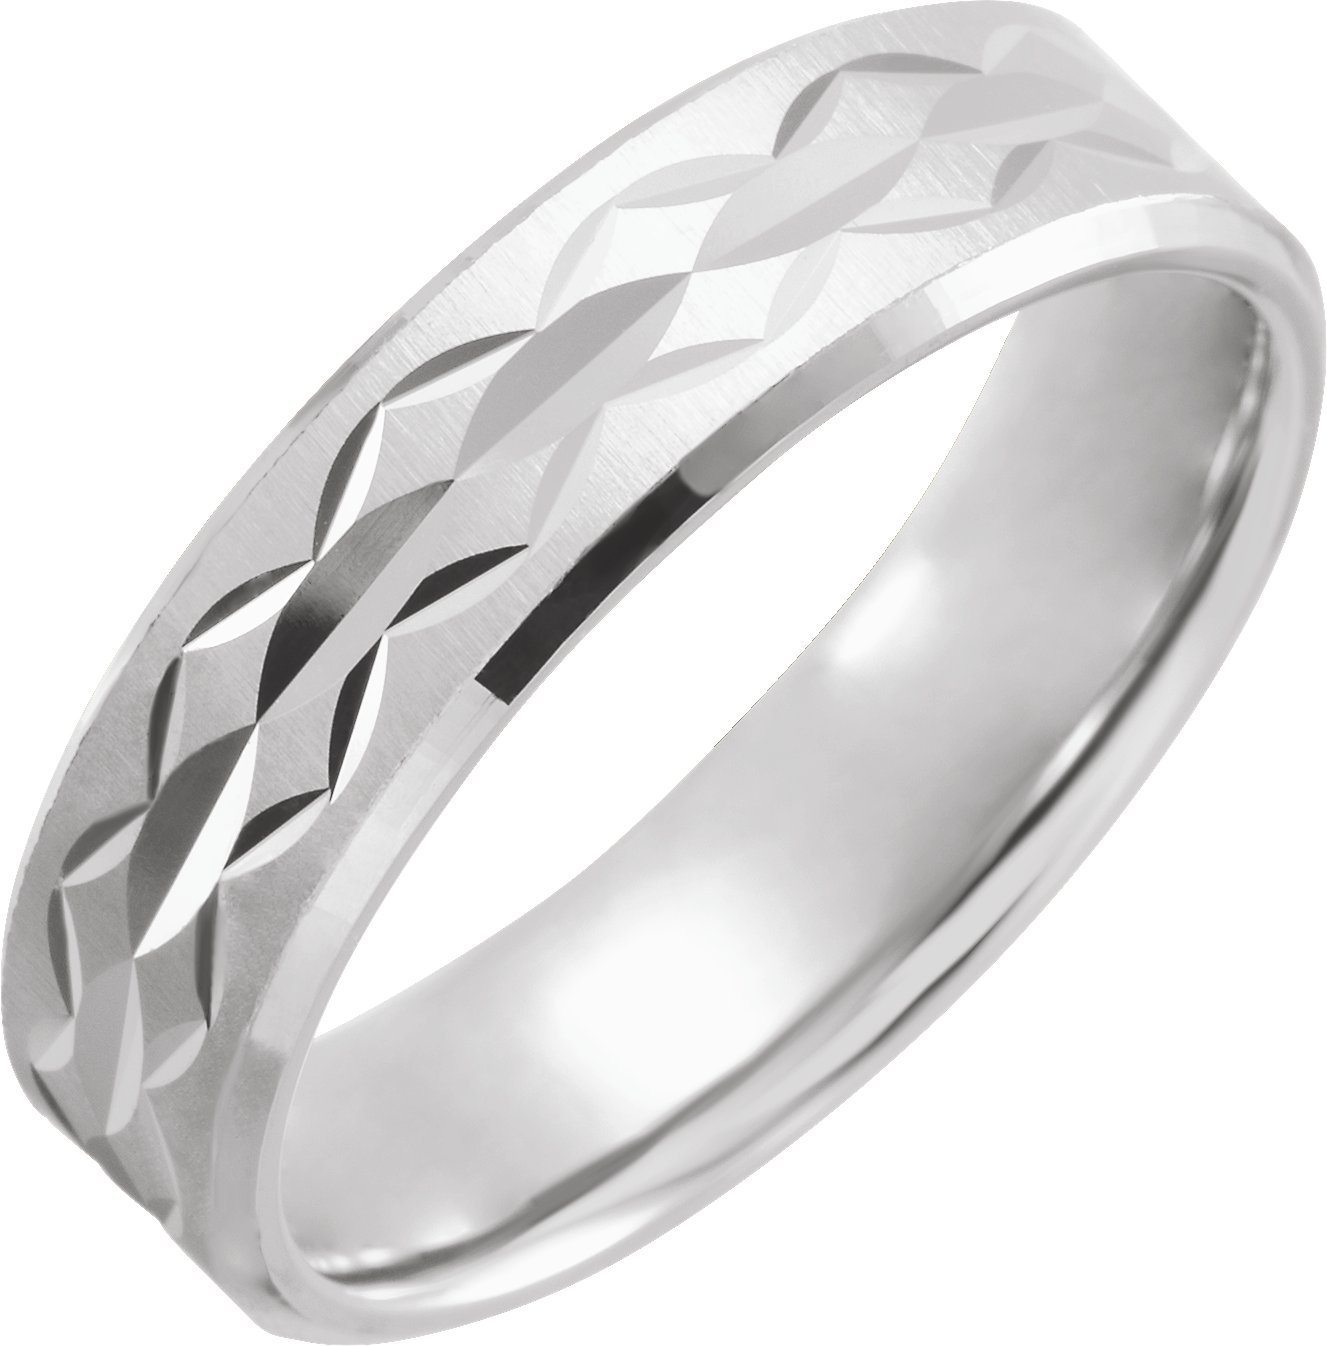 Sterling Silver 6 mm Design Band with Satin Polished Finish Size 18.5 Ref 16486123